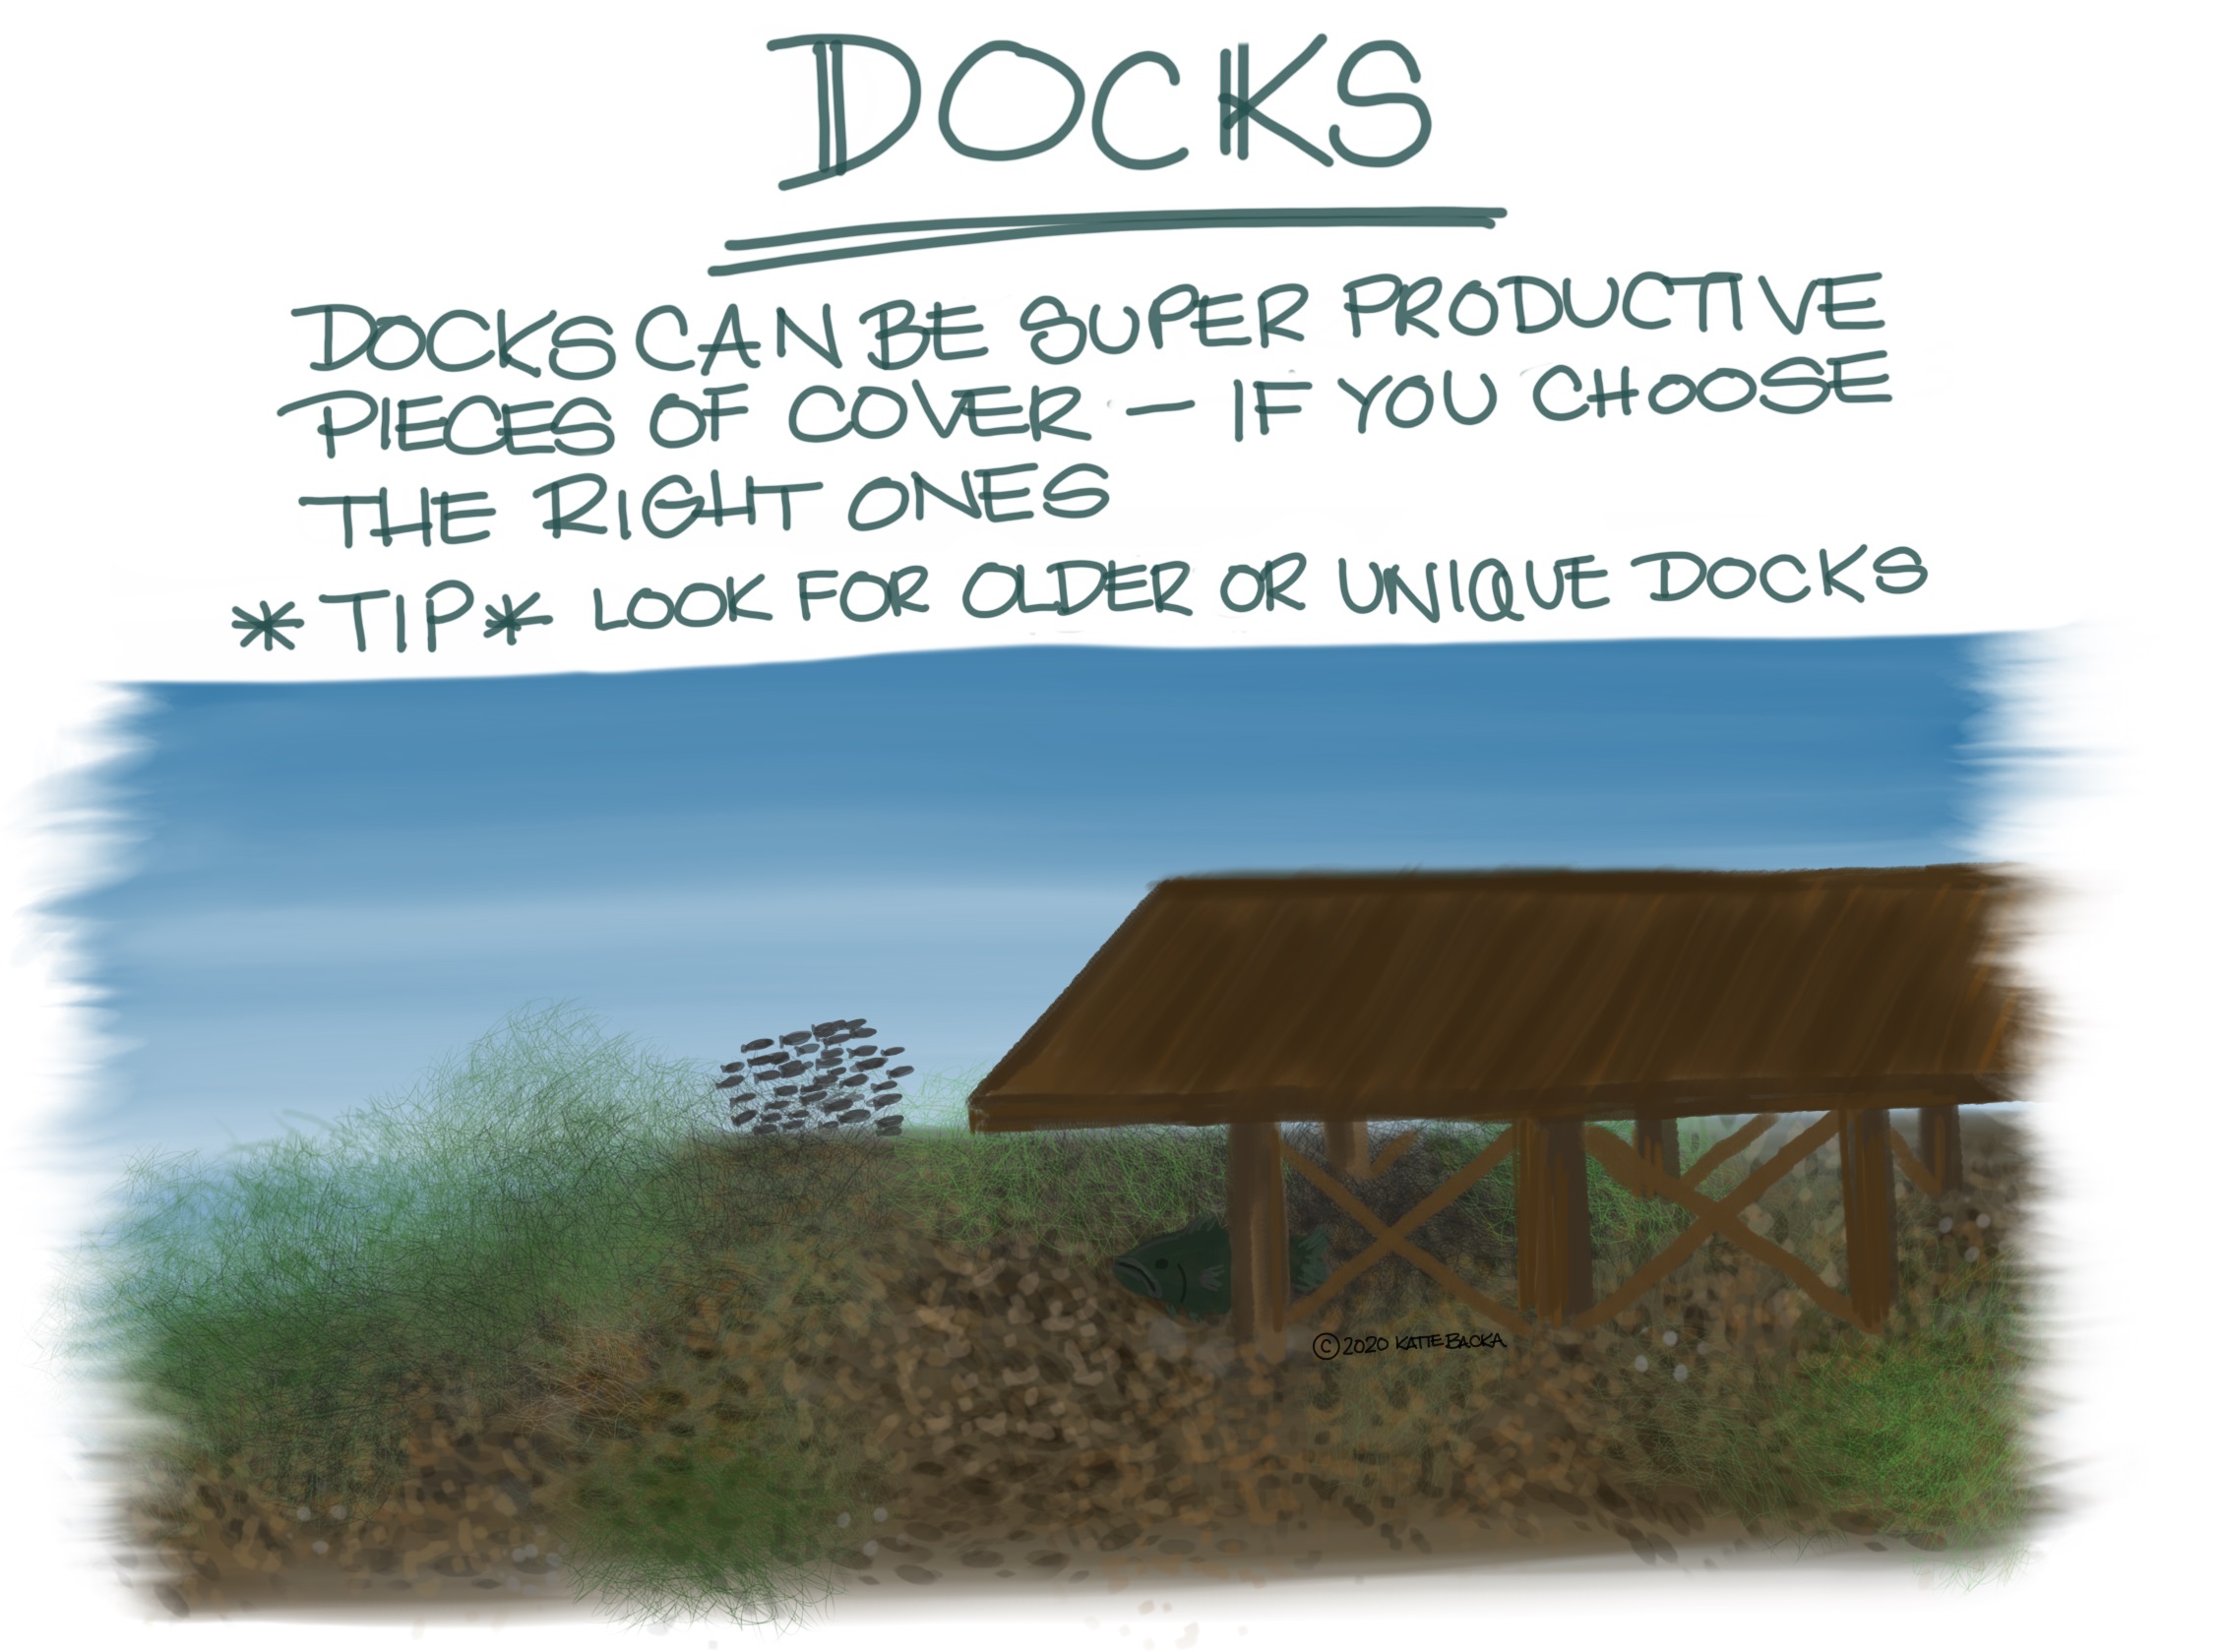 Script: Docks, docks can be super productive pieces of cover - if you choose the right ones *tip, look for older or unique docks